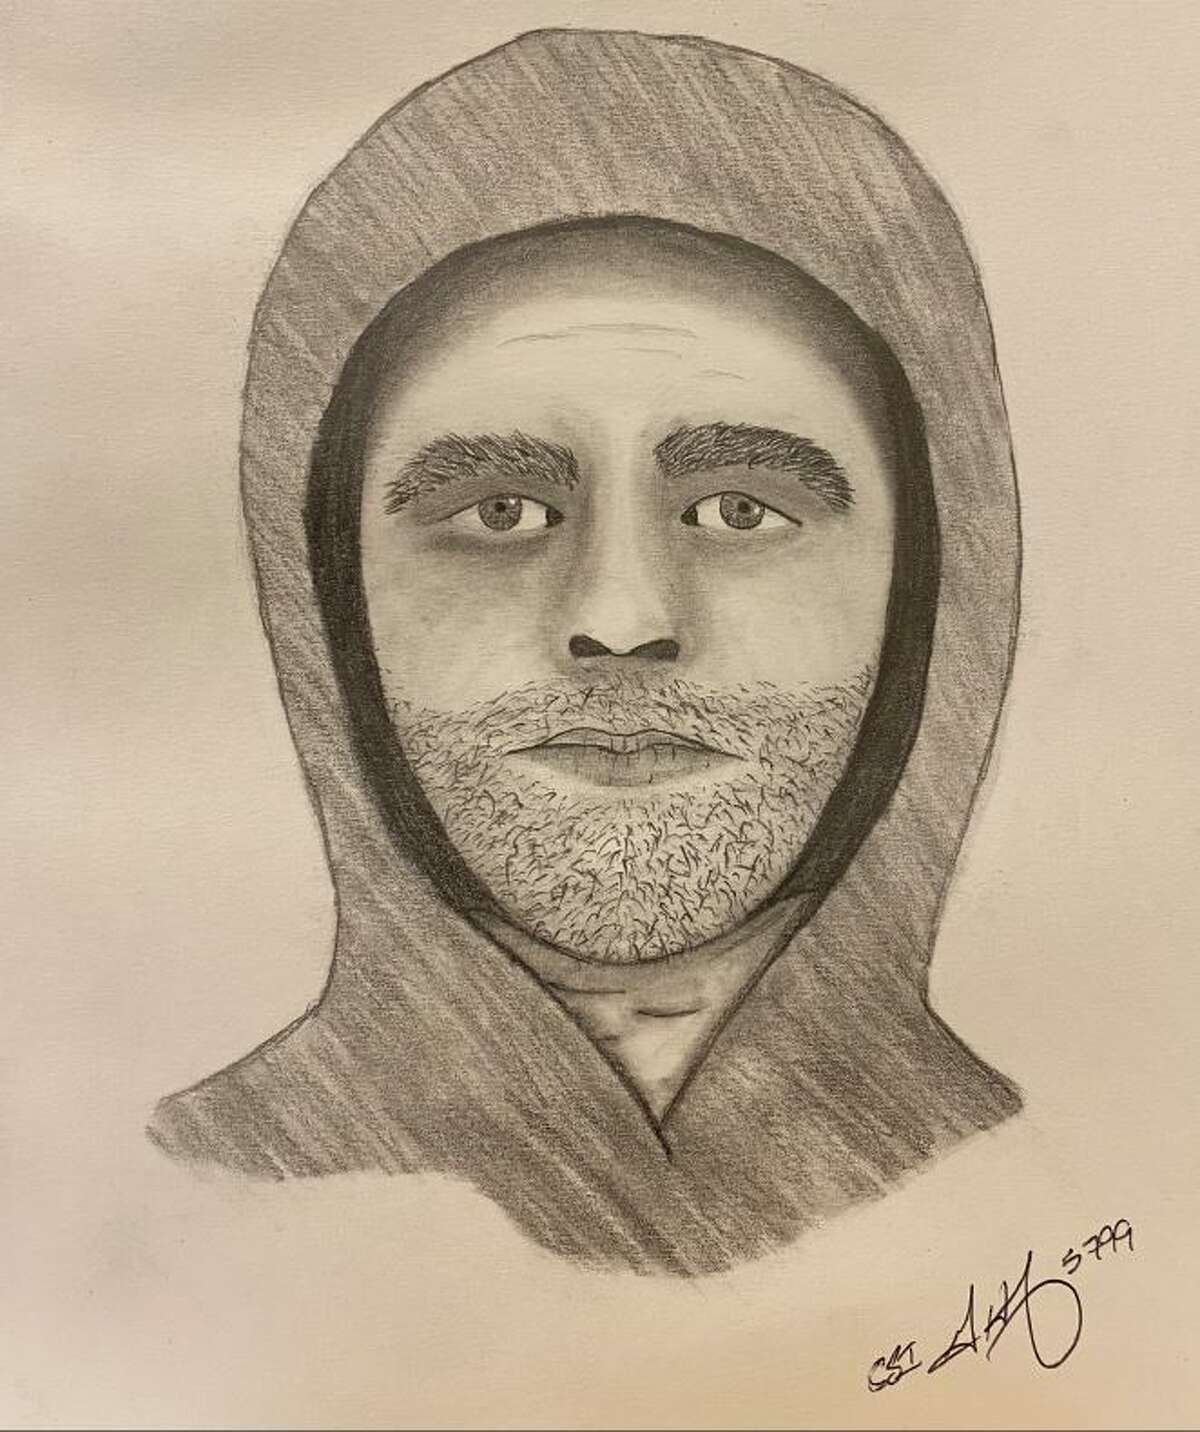 Police have released a sketch of a man sought in connection to a sexual assault Friday morning in Madison County.